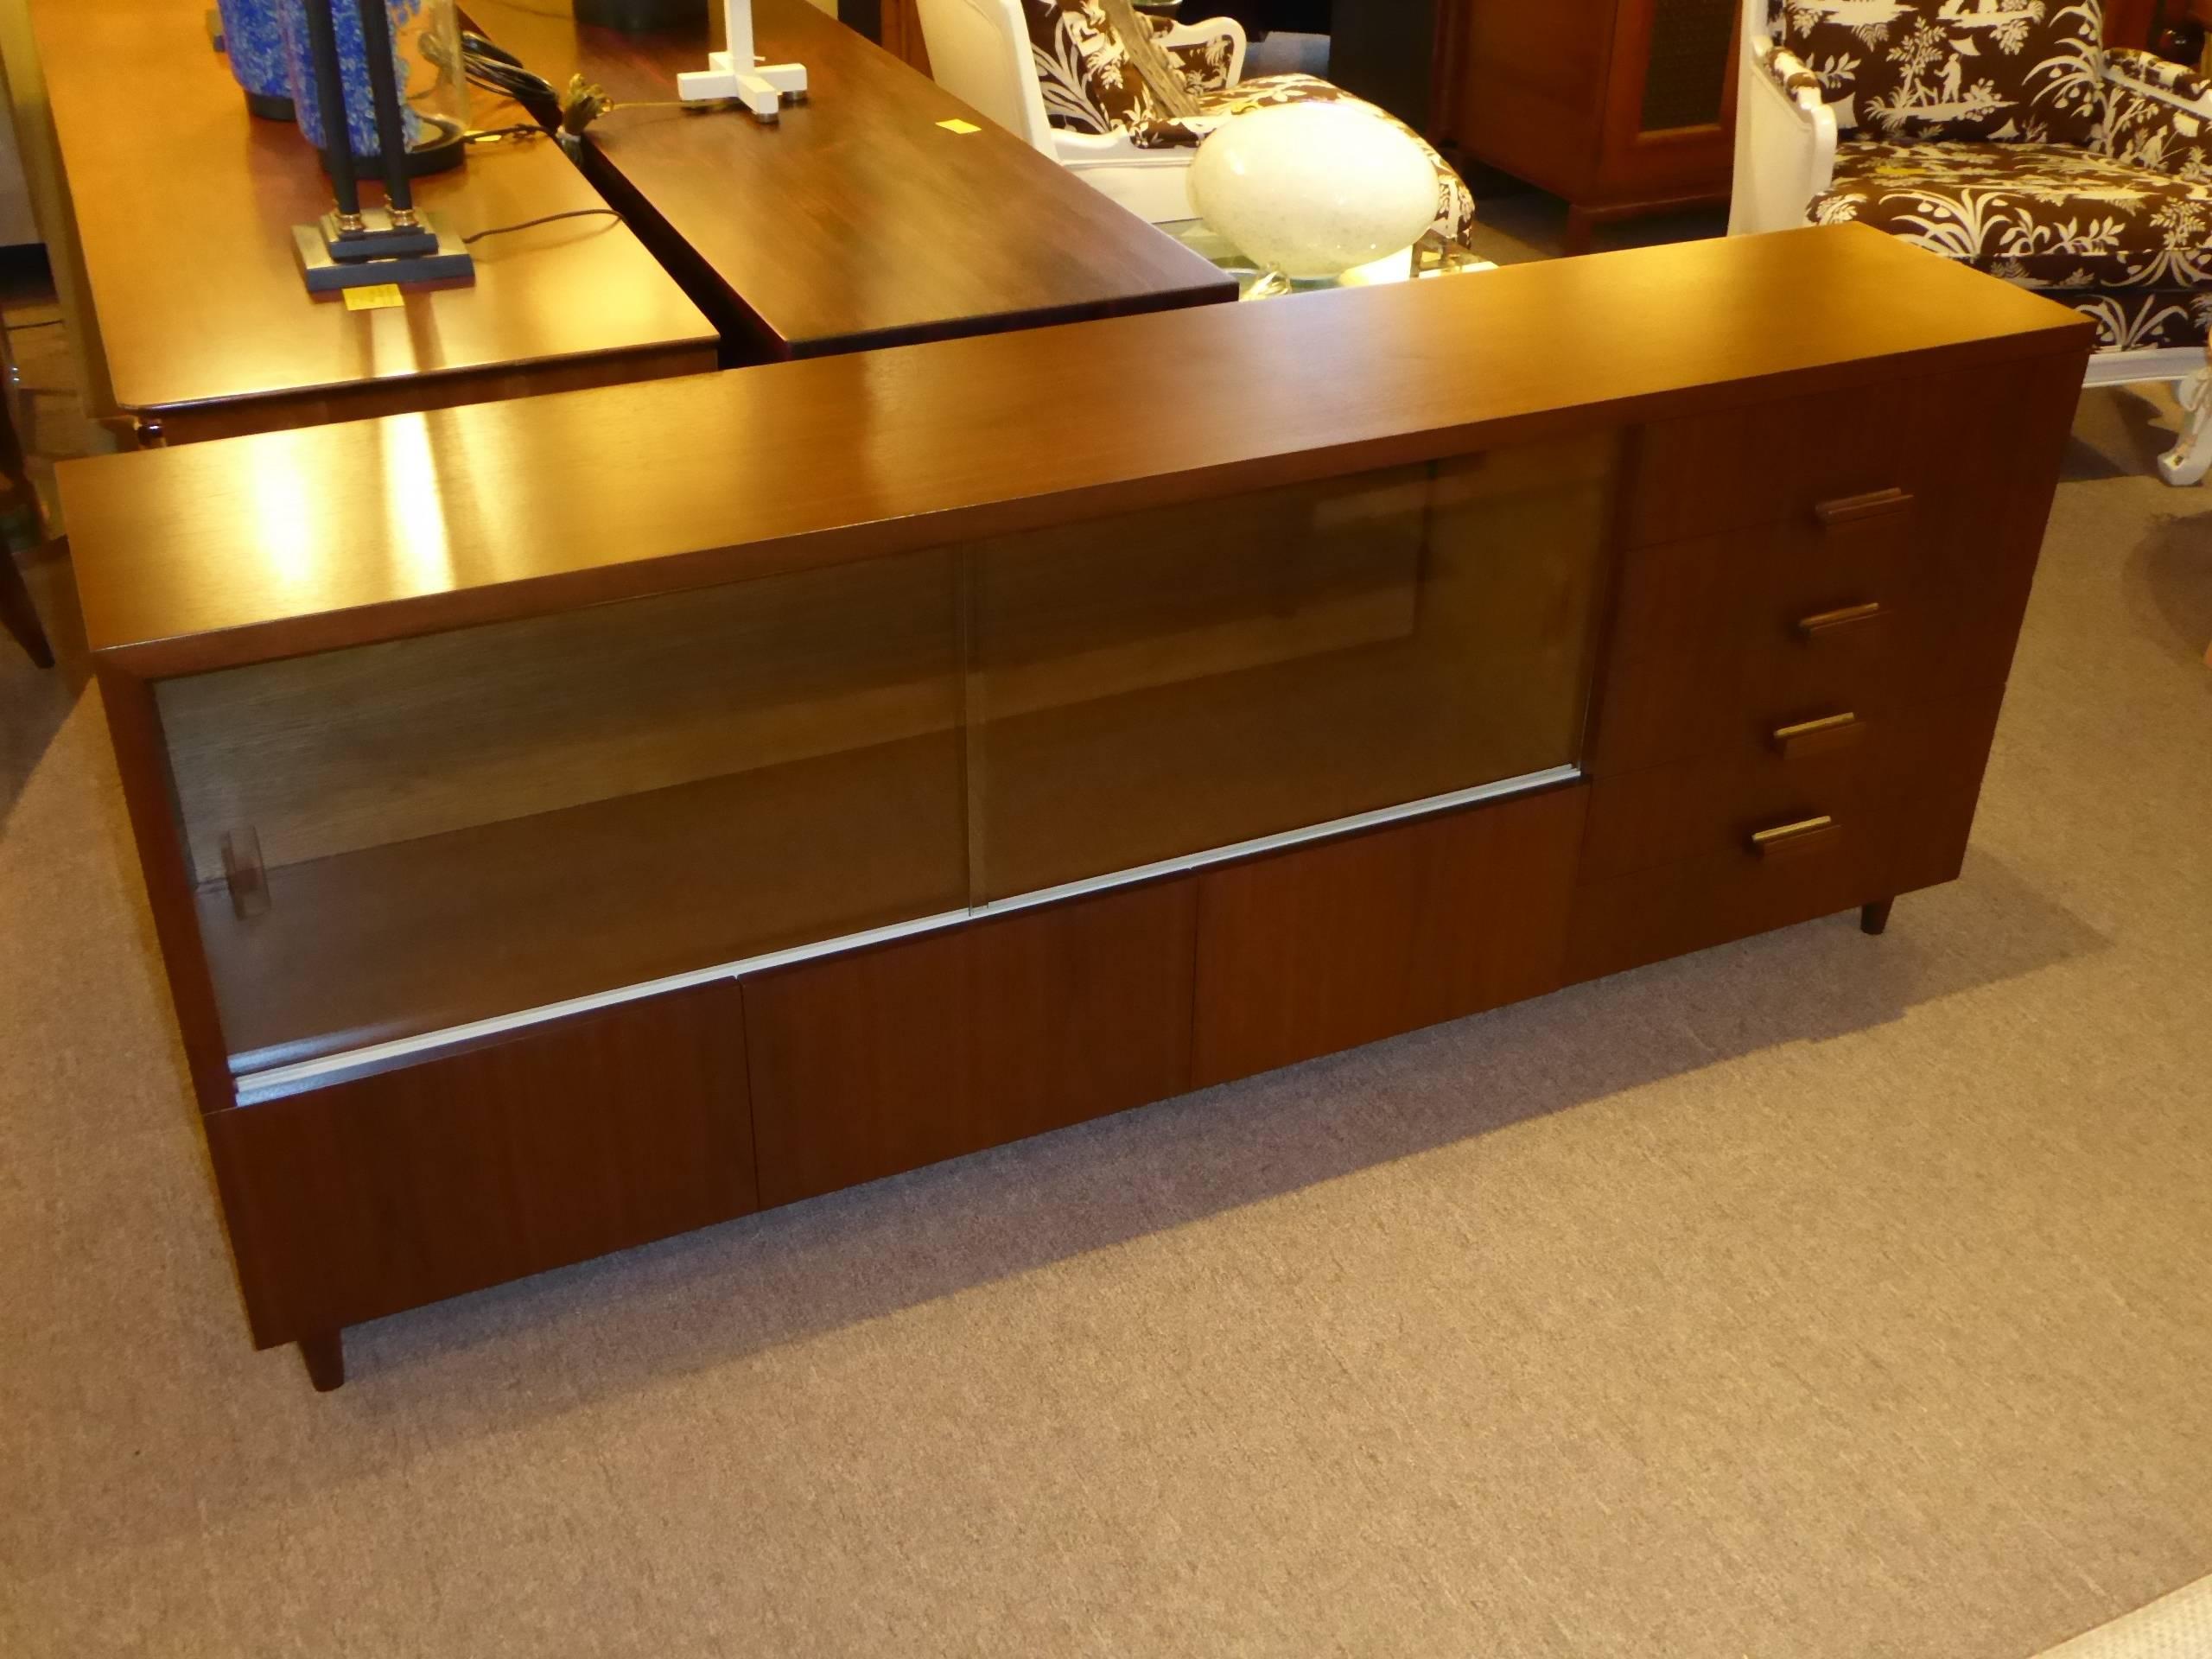 1950s walnut credenza with drawers, glass doors and bottom cabinet. Exhibiting a wonderful scale of long and narrow, not too deep, this credenza was a custom bespoke design by Robert Law Reed, noted Miami architect of the early to Mid-Century.